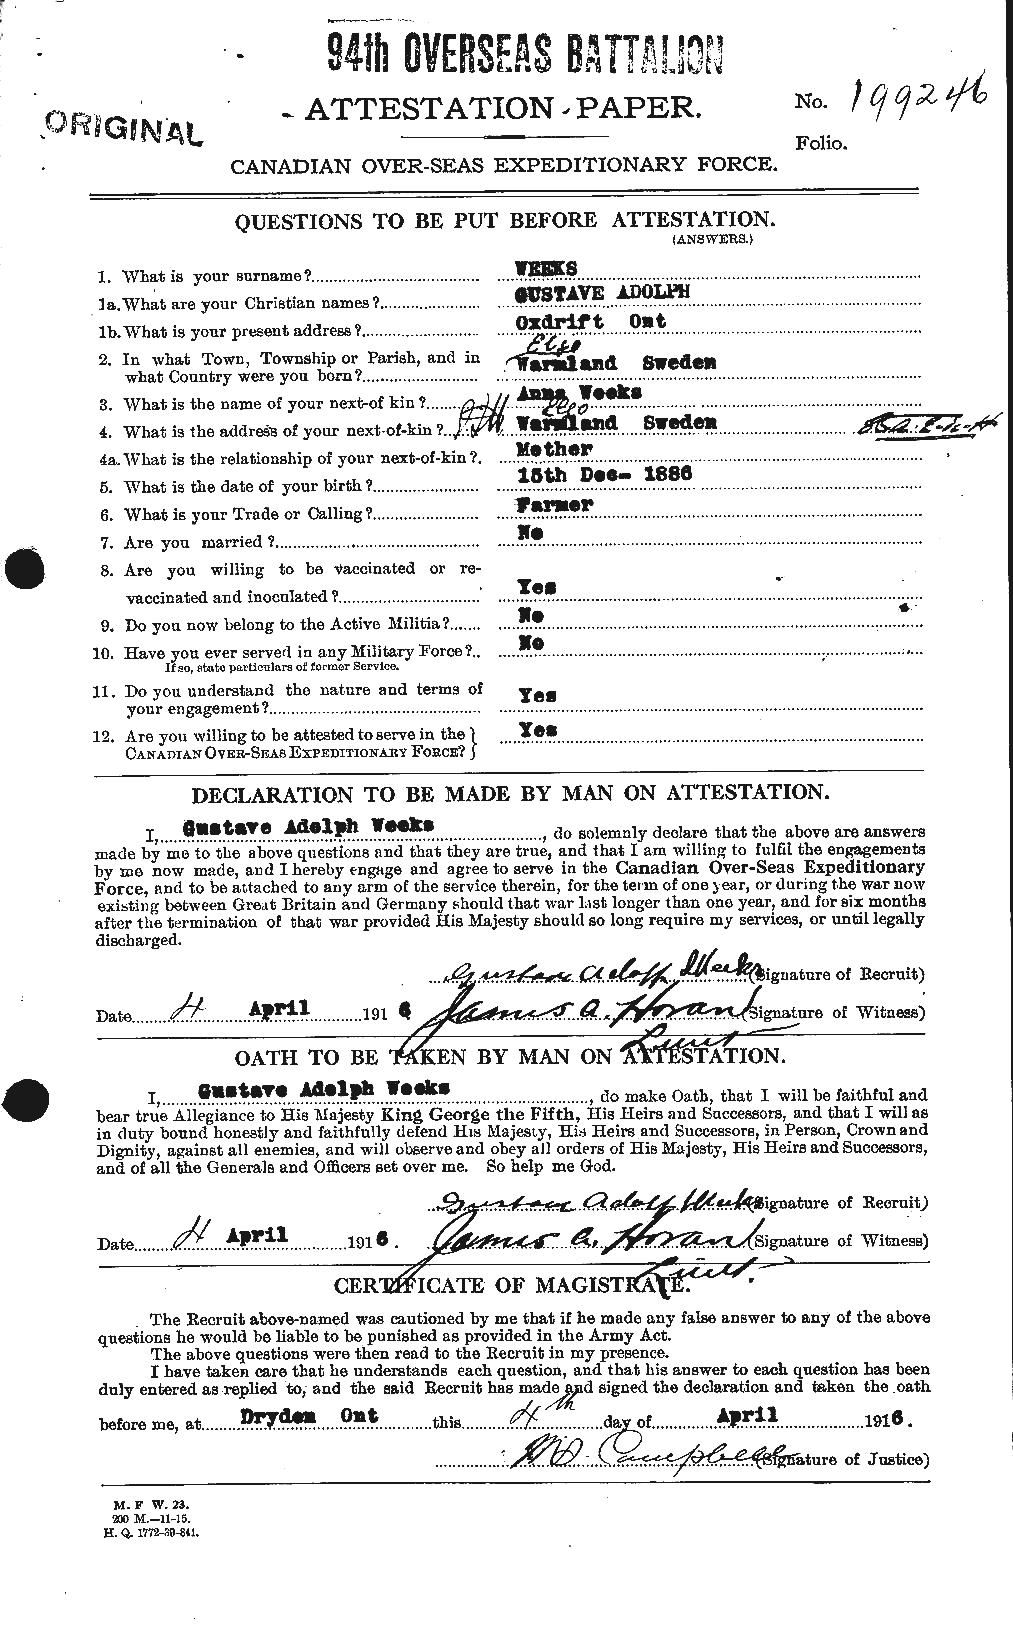 Personnel Records of the First World War - CEF 662235a